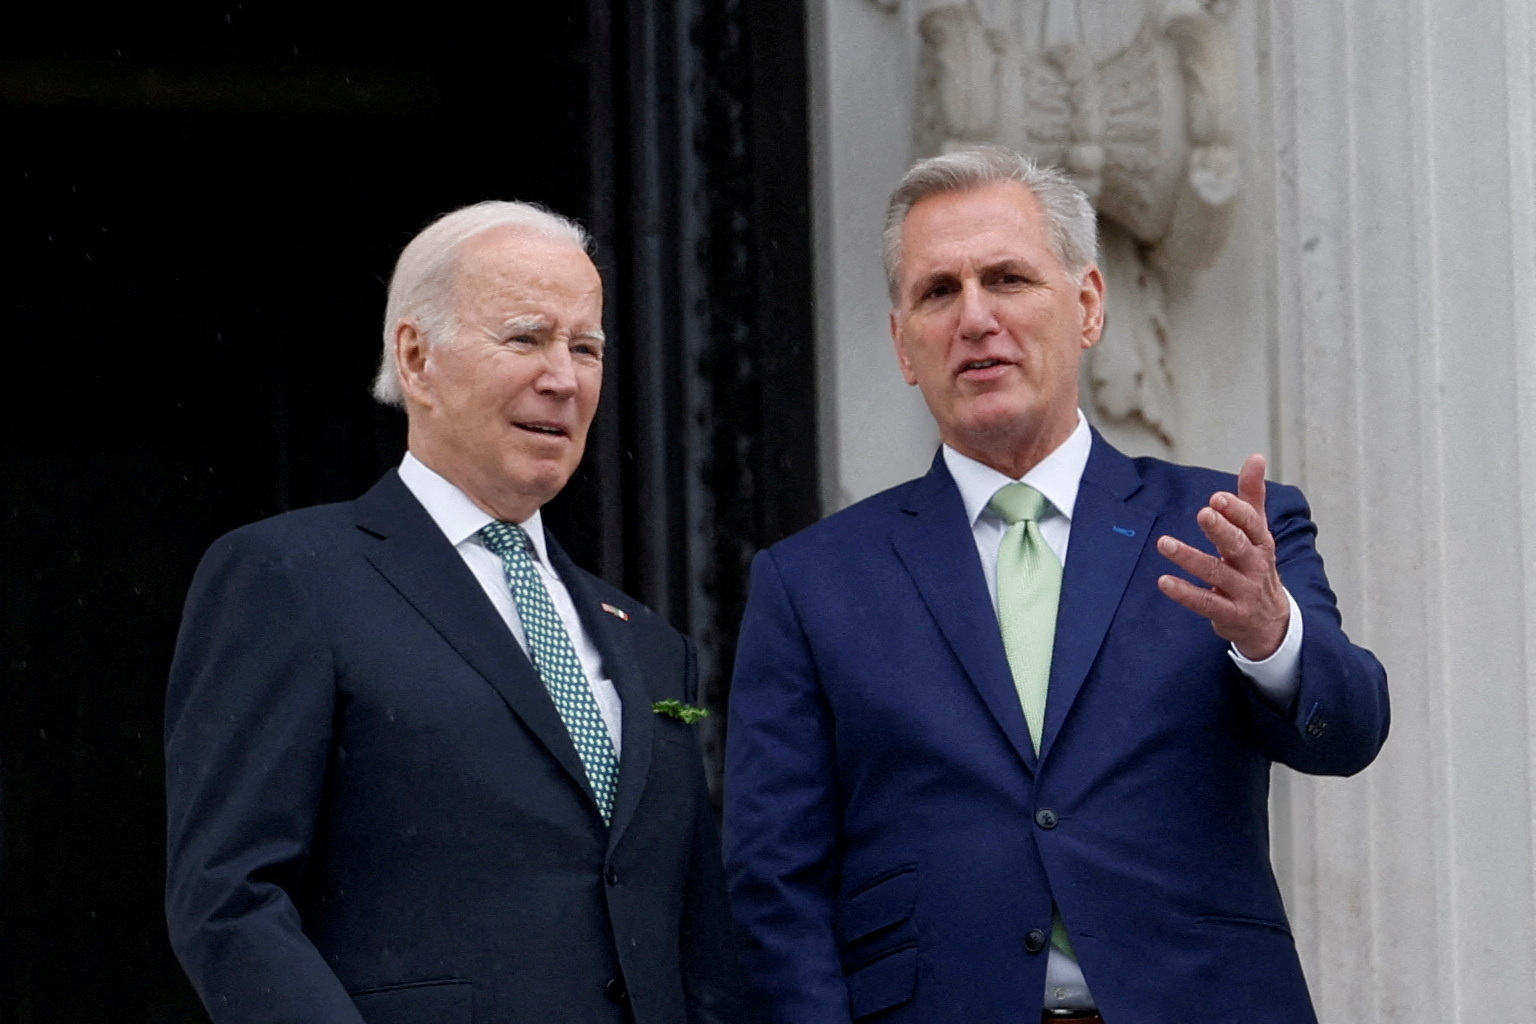 US President Joe Biden and House Speaker Kevin McCarthy after the annual Friends of Ireland luncheon in Washington